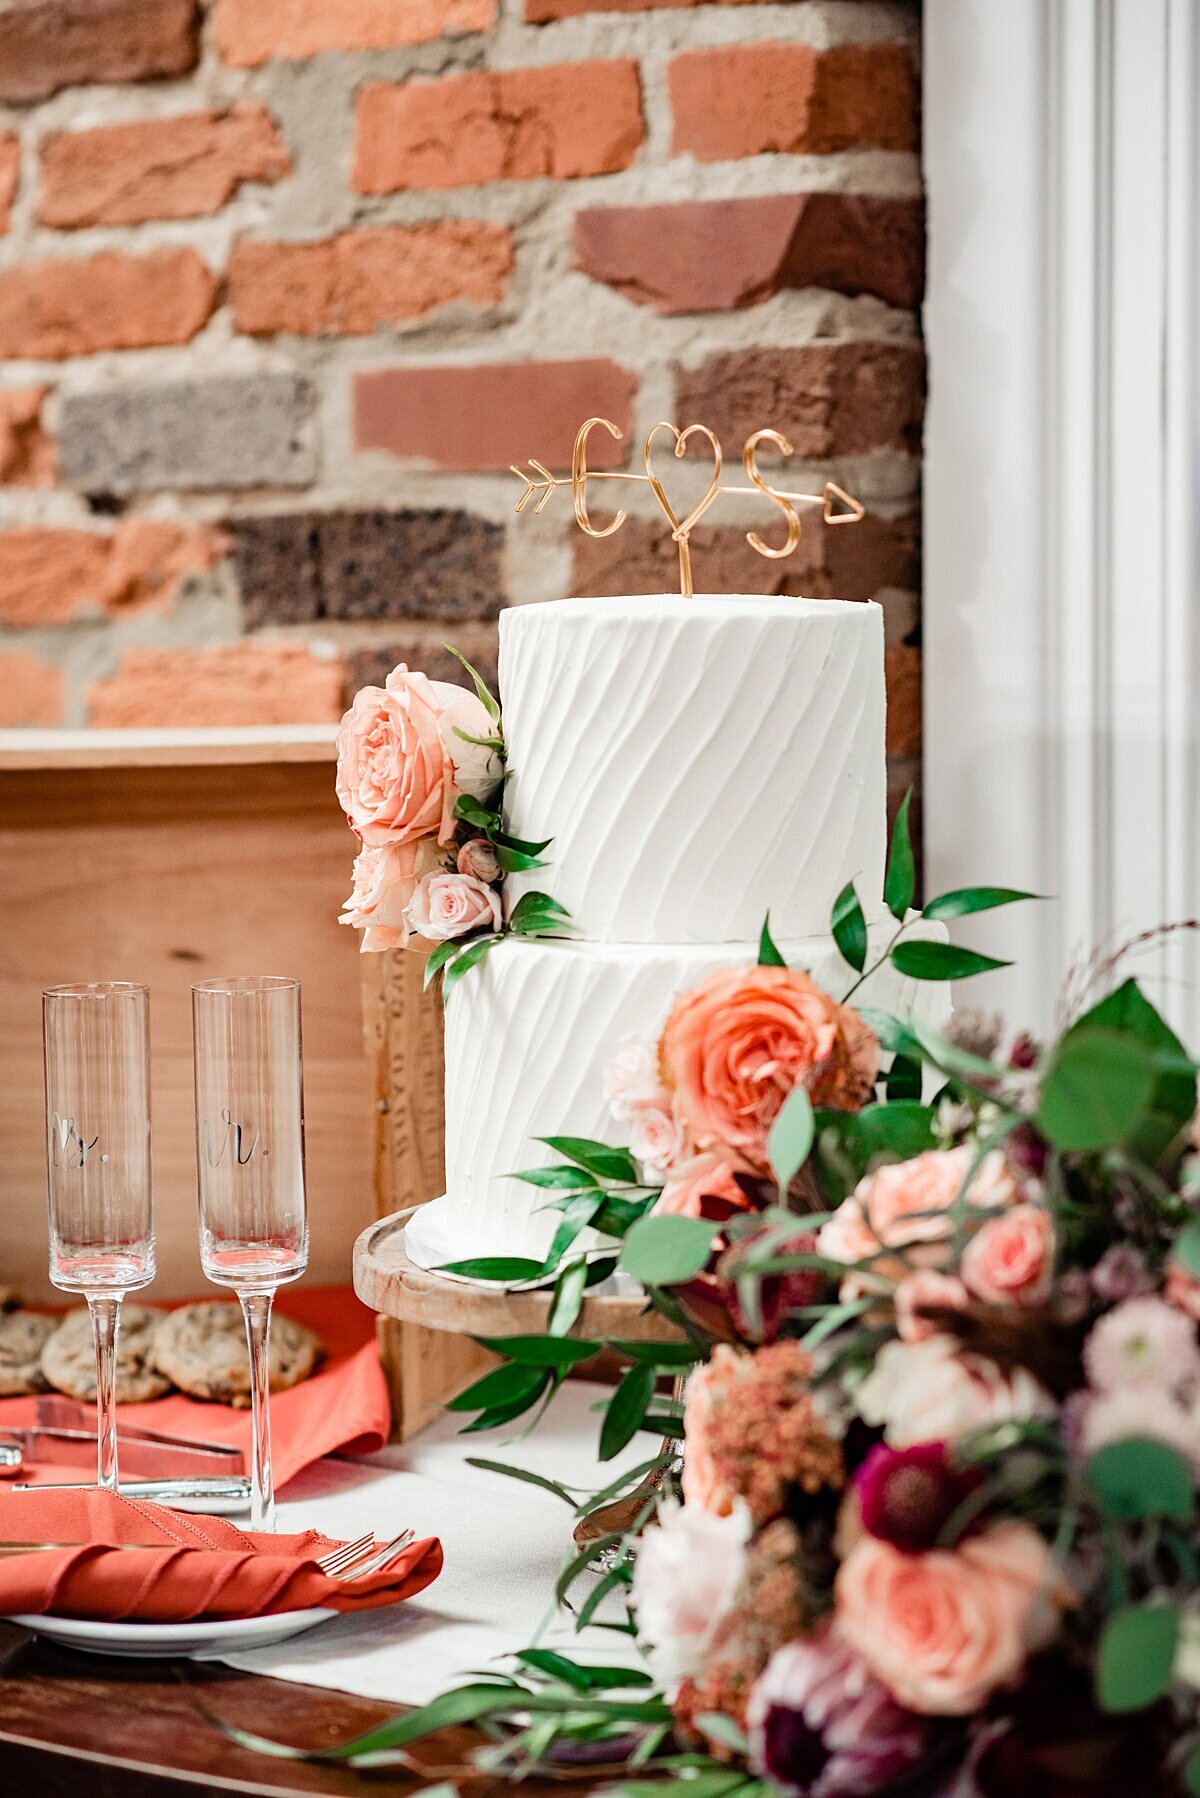 A textured two tier white wedding cake sits in front of an exposed brick wall next to a pair of stemmed champagne flutes with rust napkins. In the foreground is the bridal bouquet of peach roses, blush roses, burgundy dahlias, protea and Italian ruscus with eucalyptus.